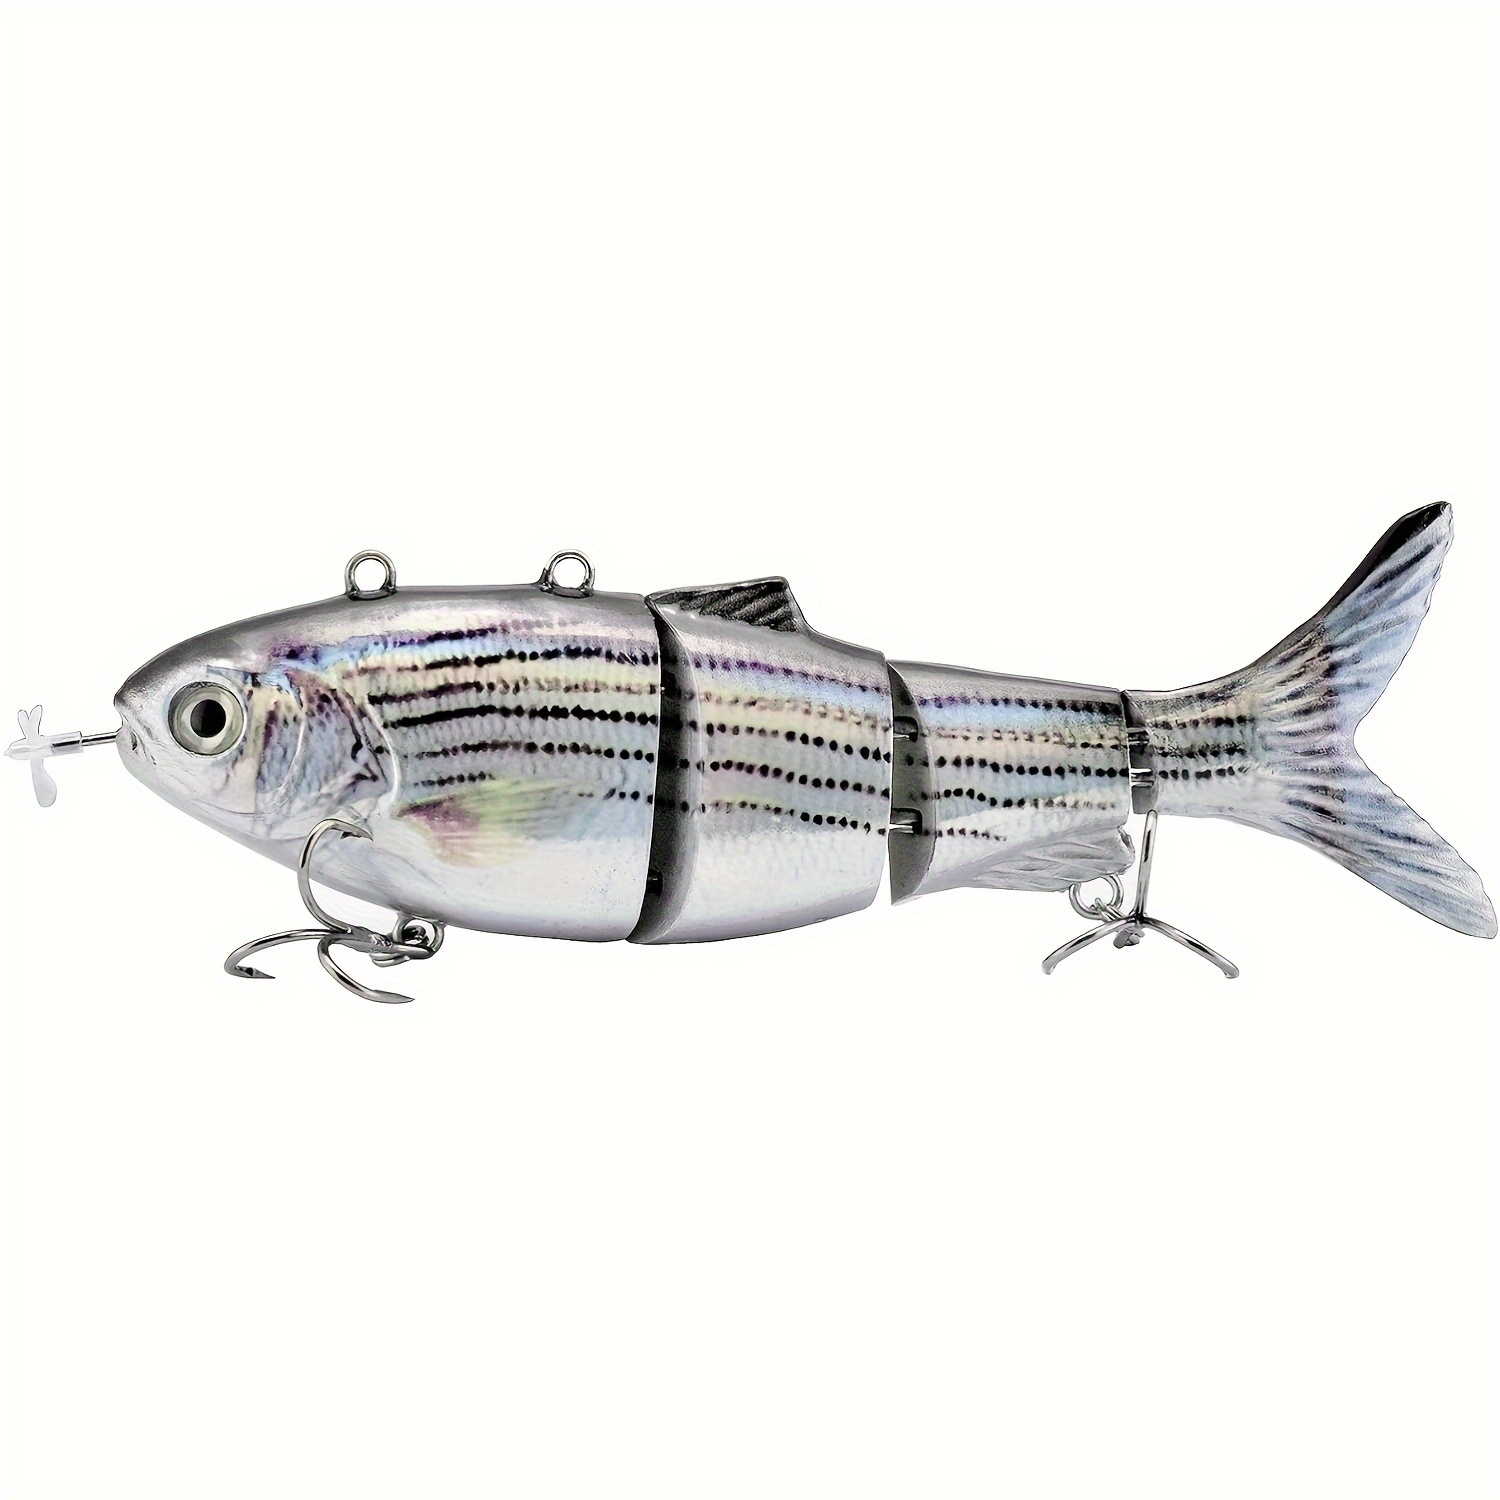 5.12inch/13cm Robotic Fishing Lures Multi Jointed 4 Segments Electric Lure  USB Rechargeable light Bait Isca Eletrica Pesca